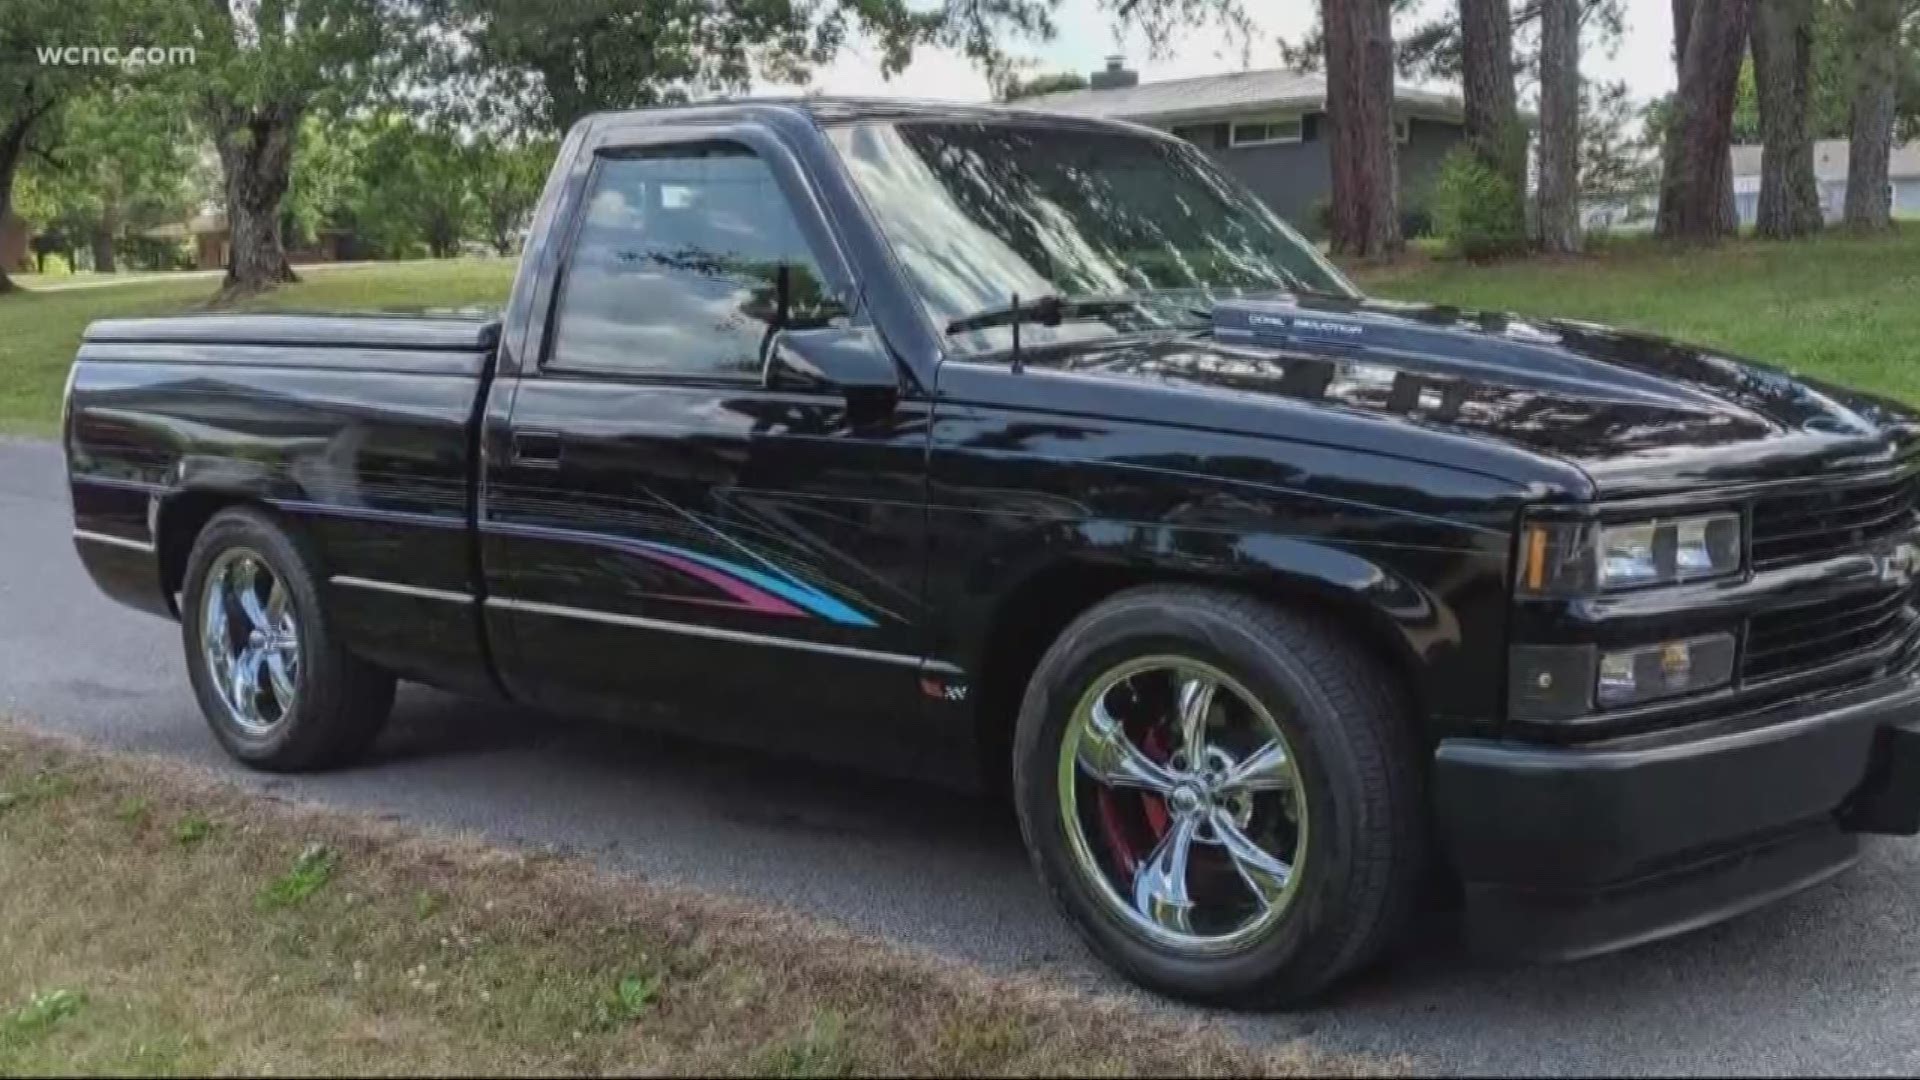 Several people have reported that their vehicles were stolen. A Facebook group launched as a result, called "Cars Stolen From Hot Rod Power Tour."